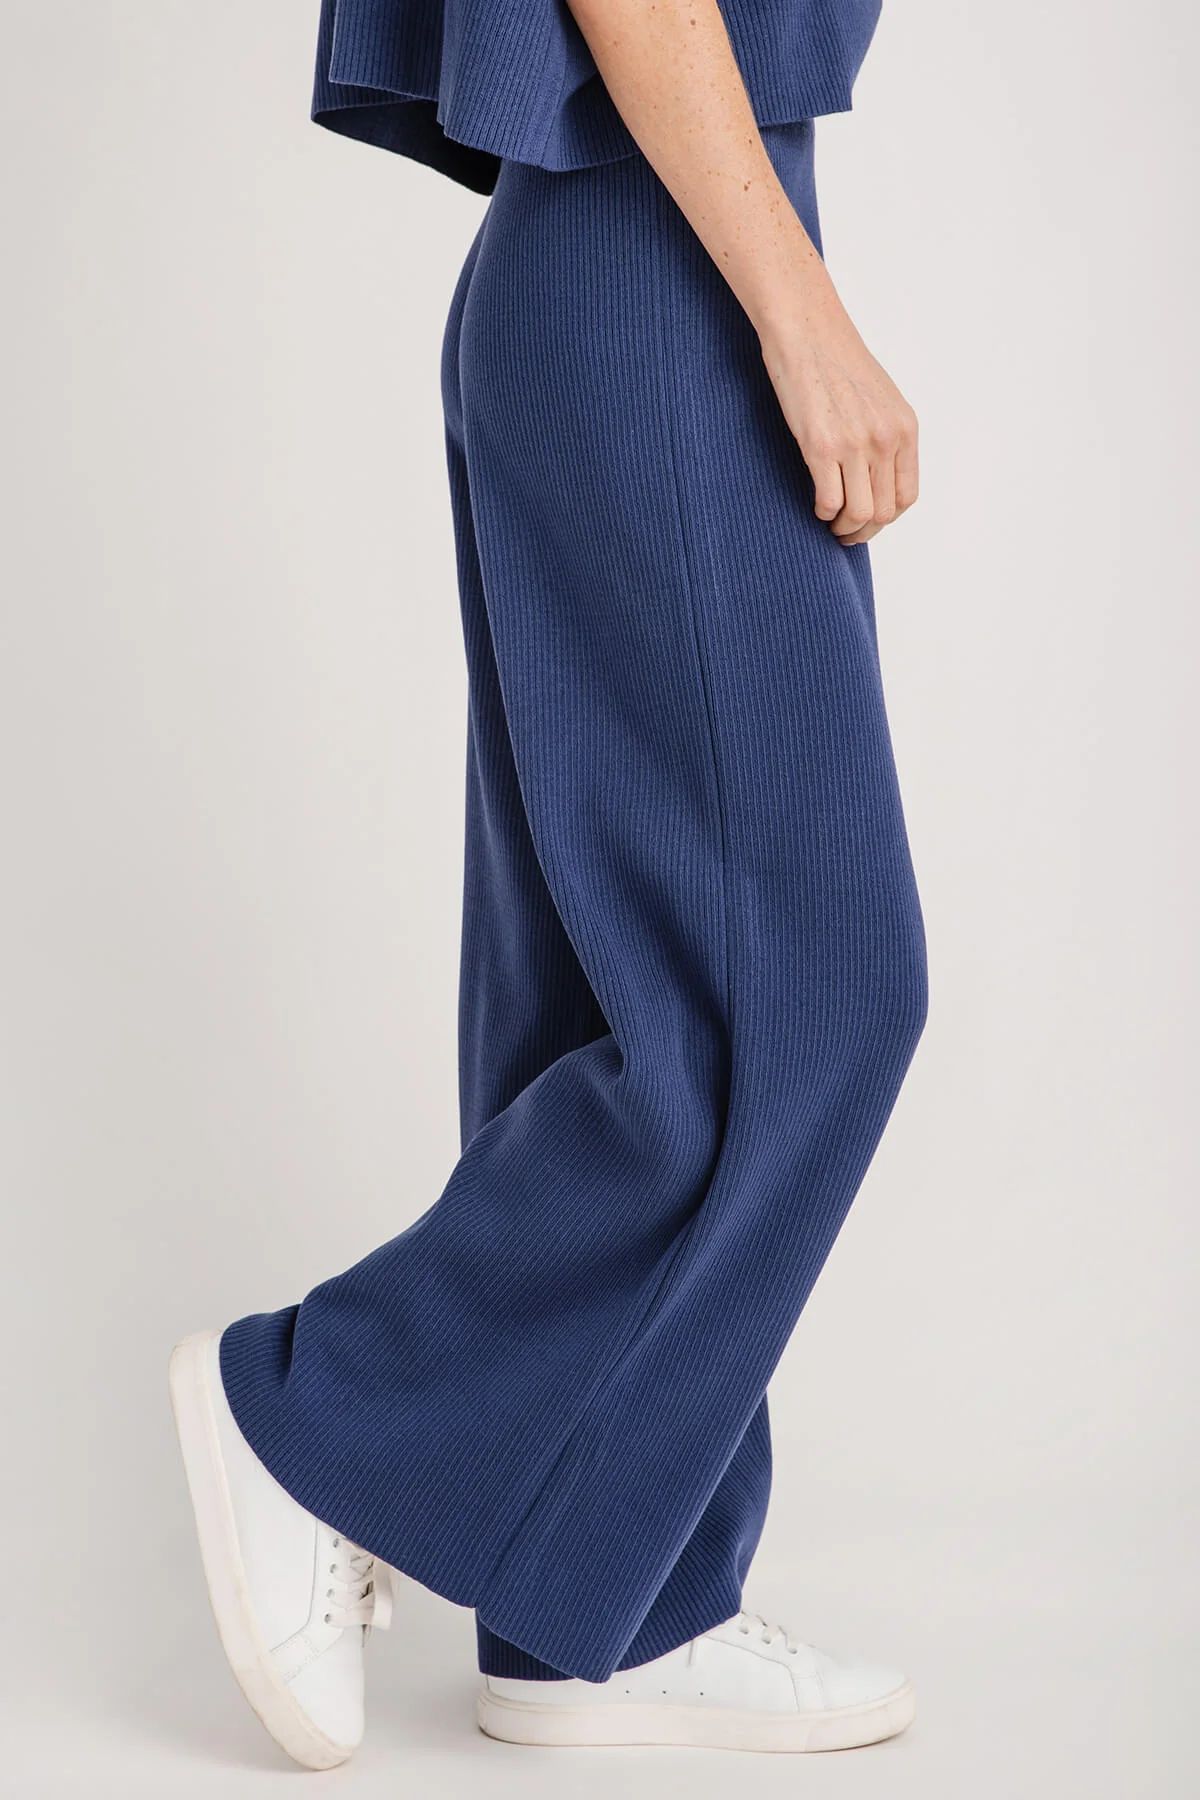 By Together Wideleg Knit Pant | Social Threads